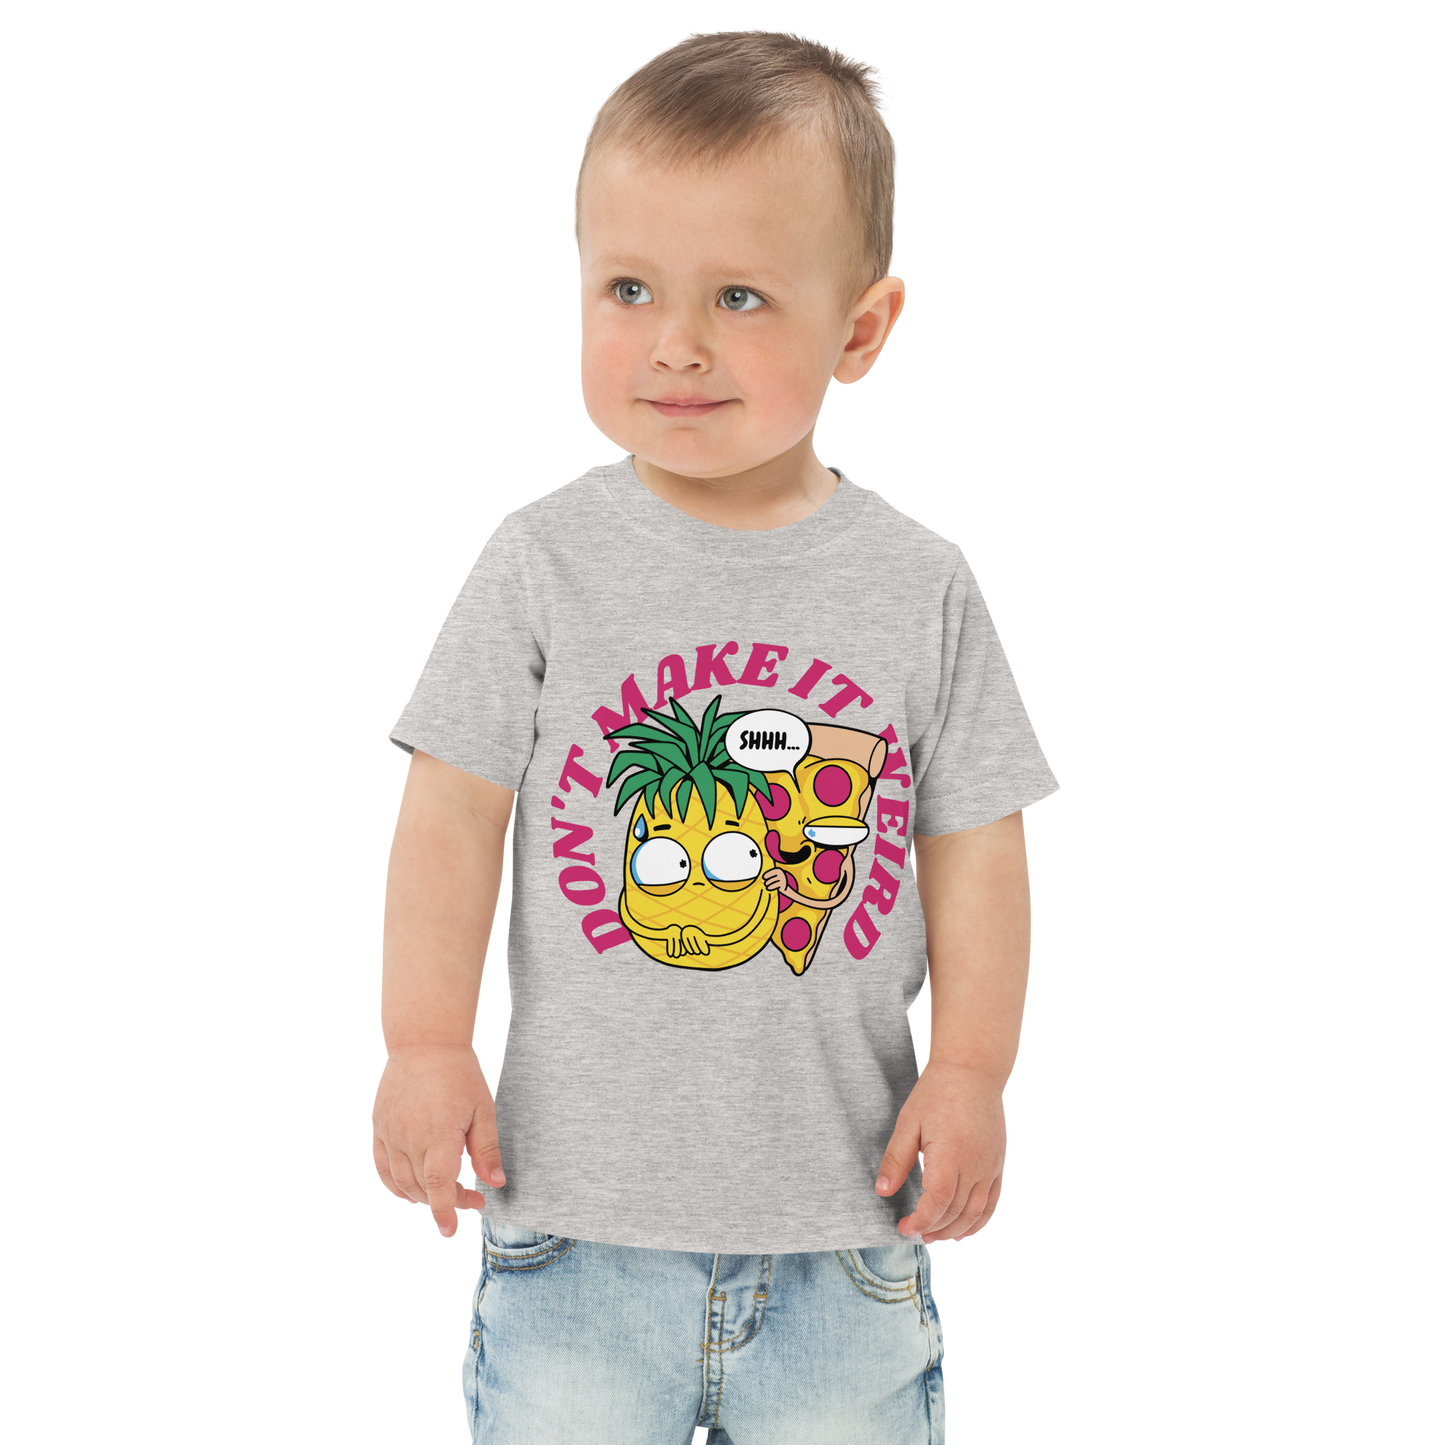 Pizza and pineapple food | Toddler jersey t-shirt